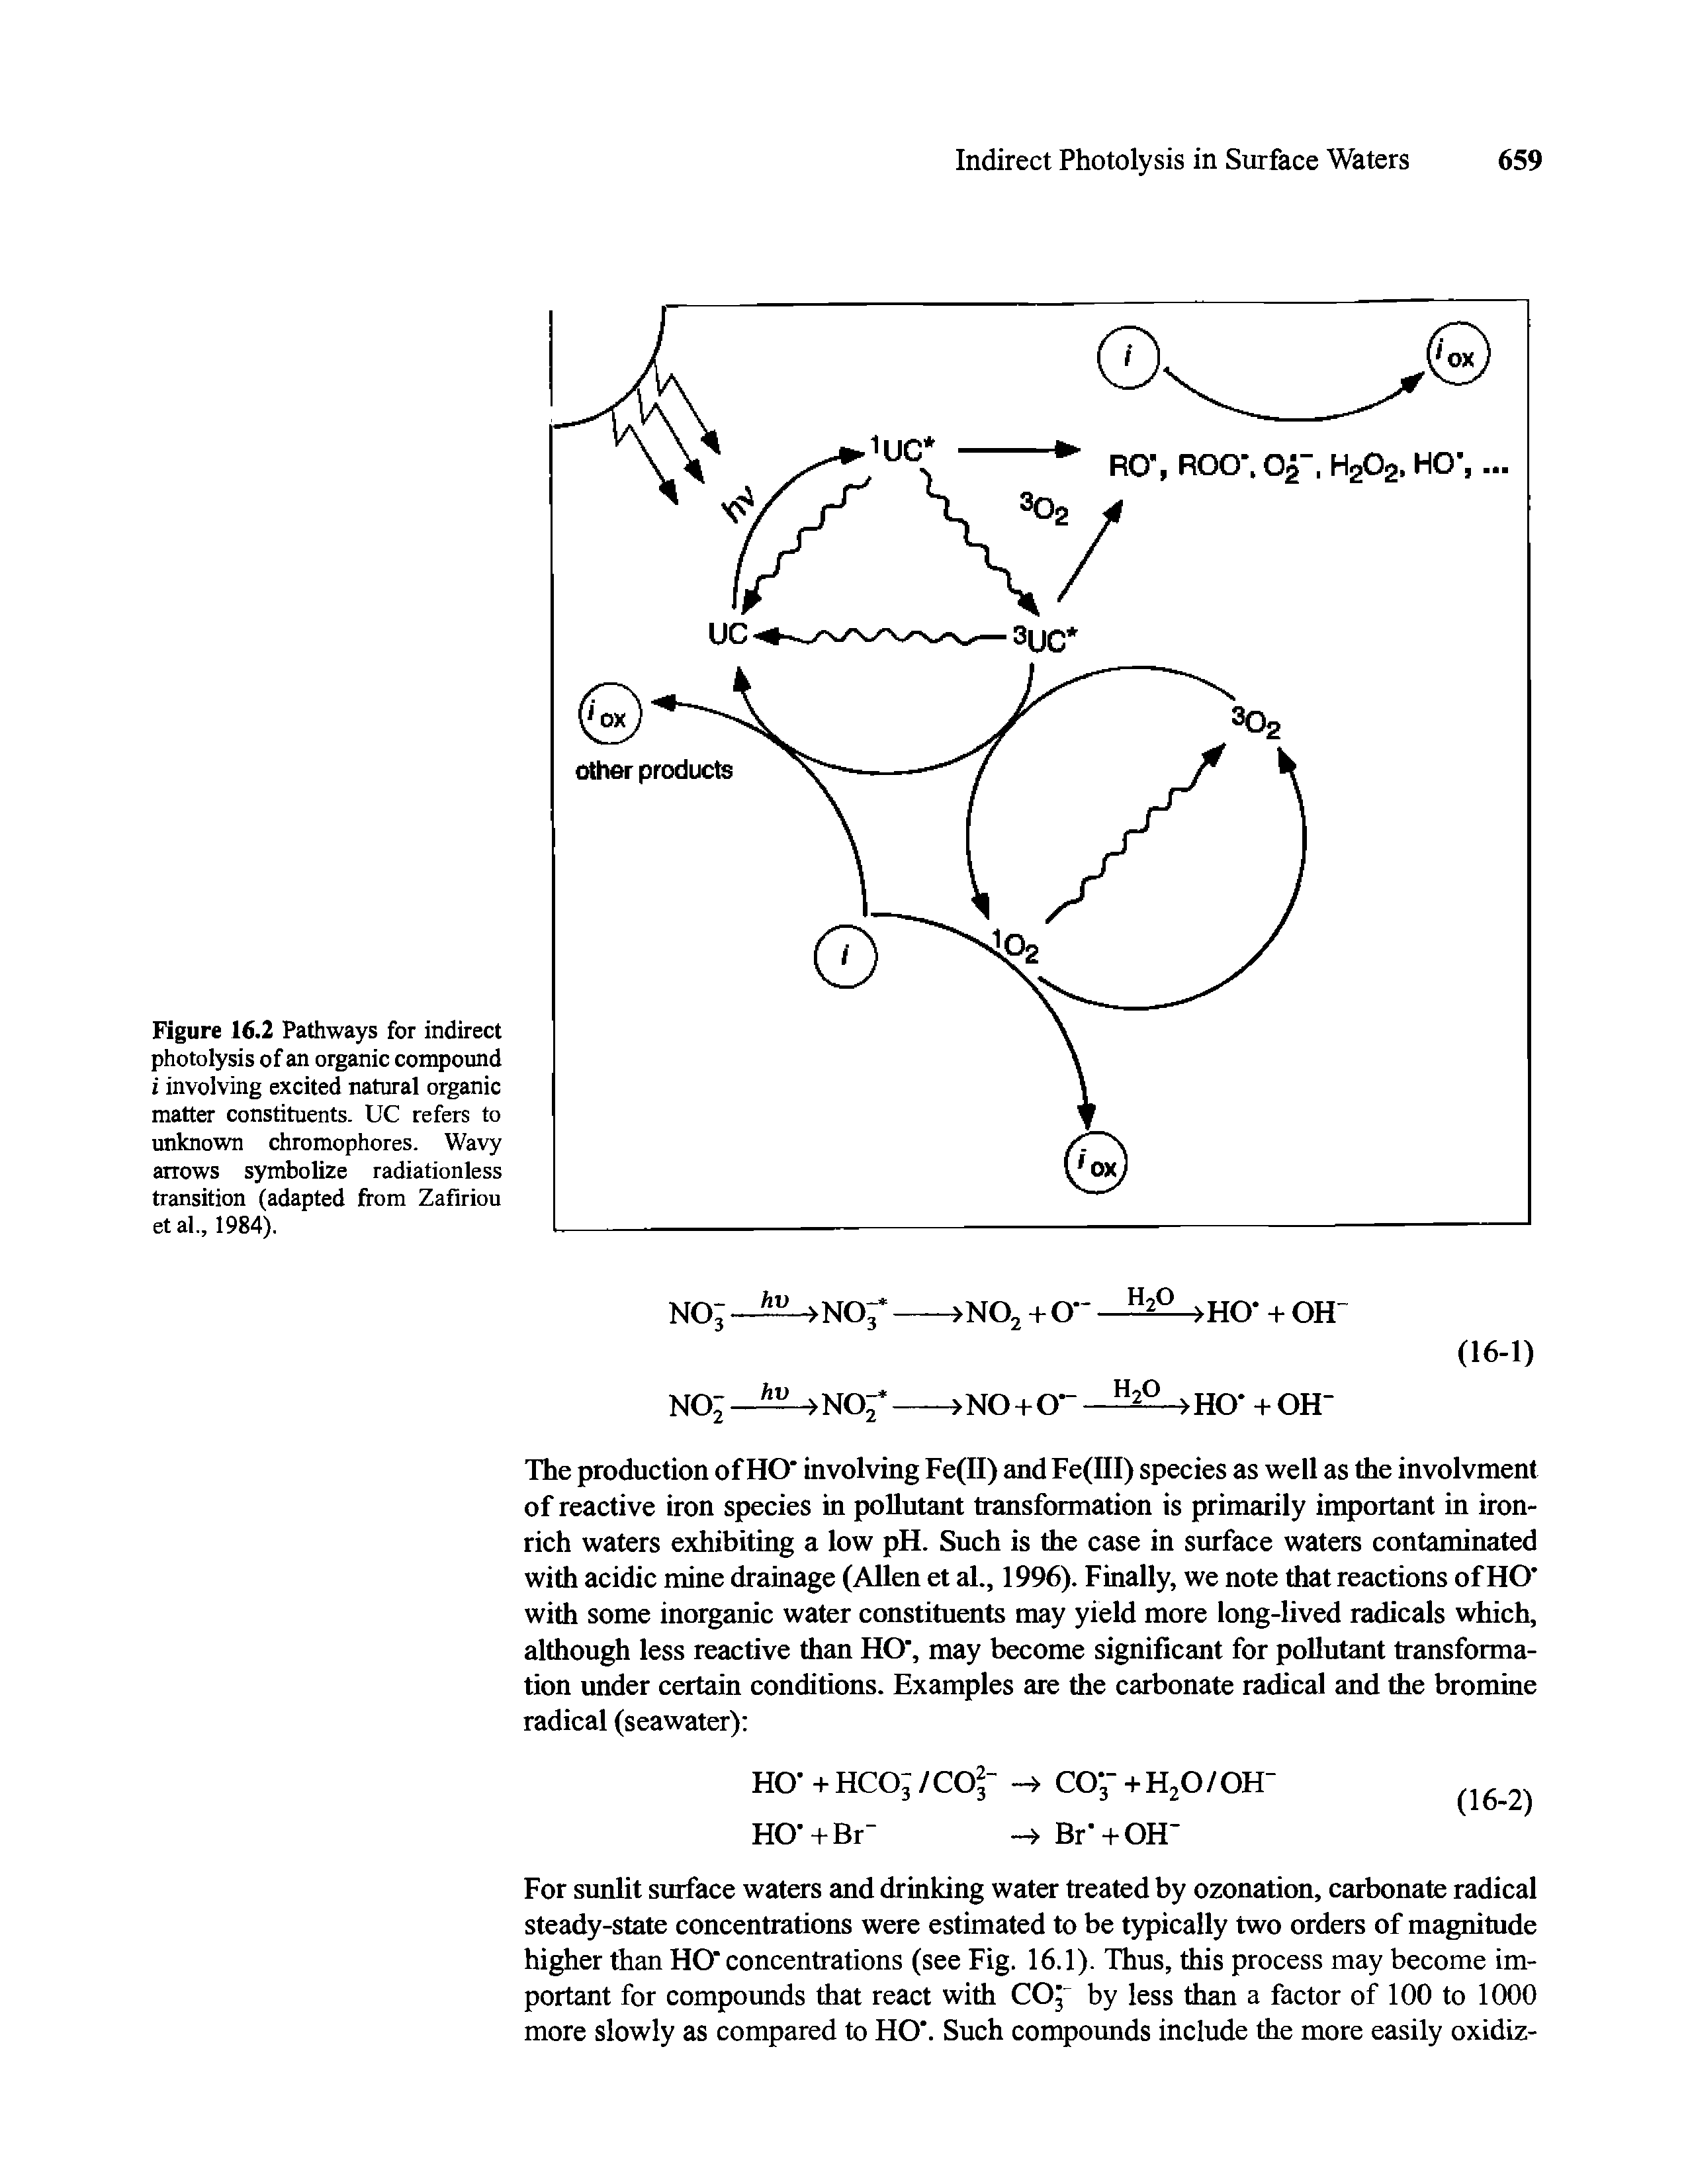 Figure 16.2 Pathways for indirect photolysis of an organic compound i involving excited natural organic matter constituents. UC refers to unknown chromophores. Wavy arrows symbolize radiationless transition (adapted from Zafiriou et al., 1984).